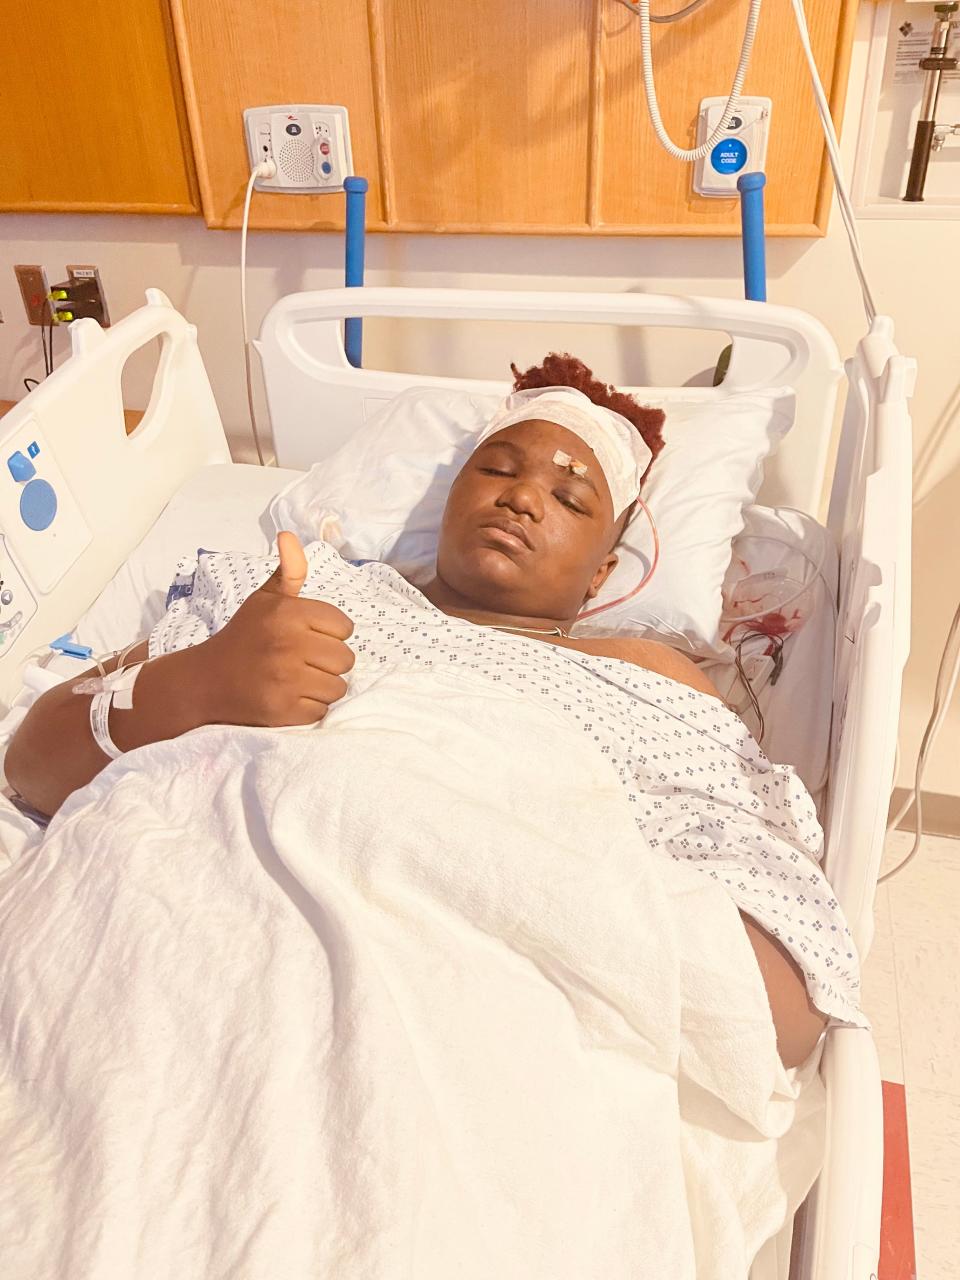 Wilmington Christian Academy basketball player Josiah-Pierre Theon Heyer is two years removed from a brain surgery that's left him with numerous challenges. Now, as a freshman, he's starting to regain the abilities he once possessed.